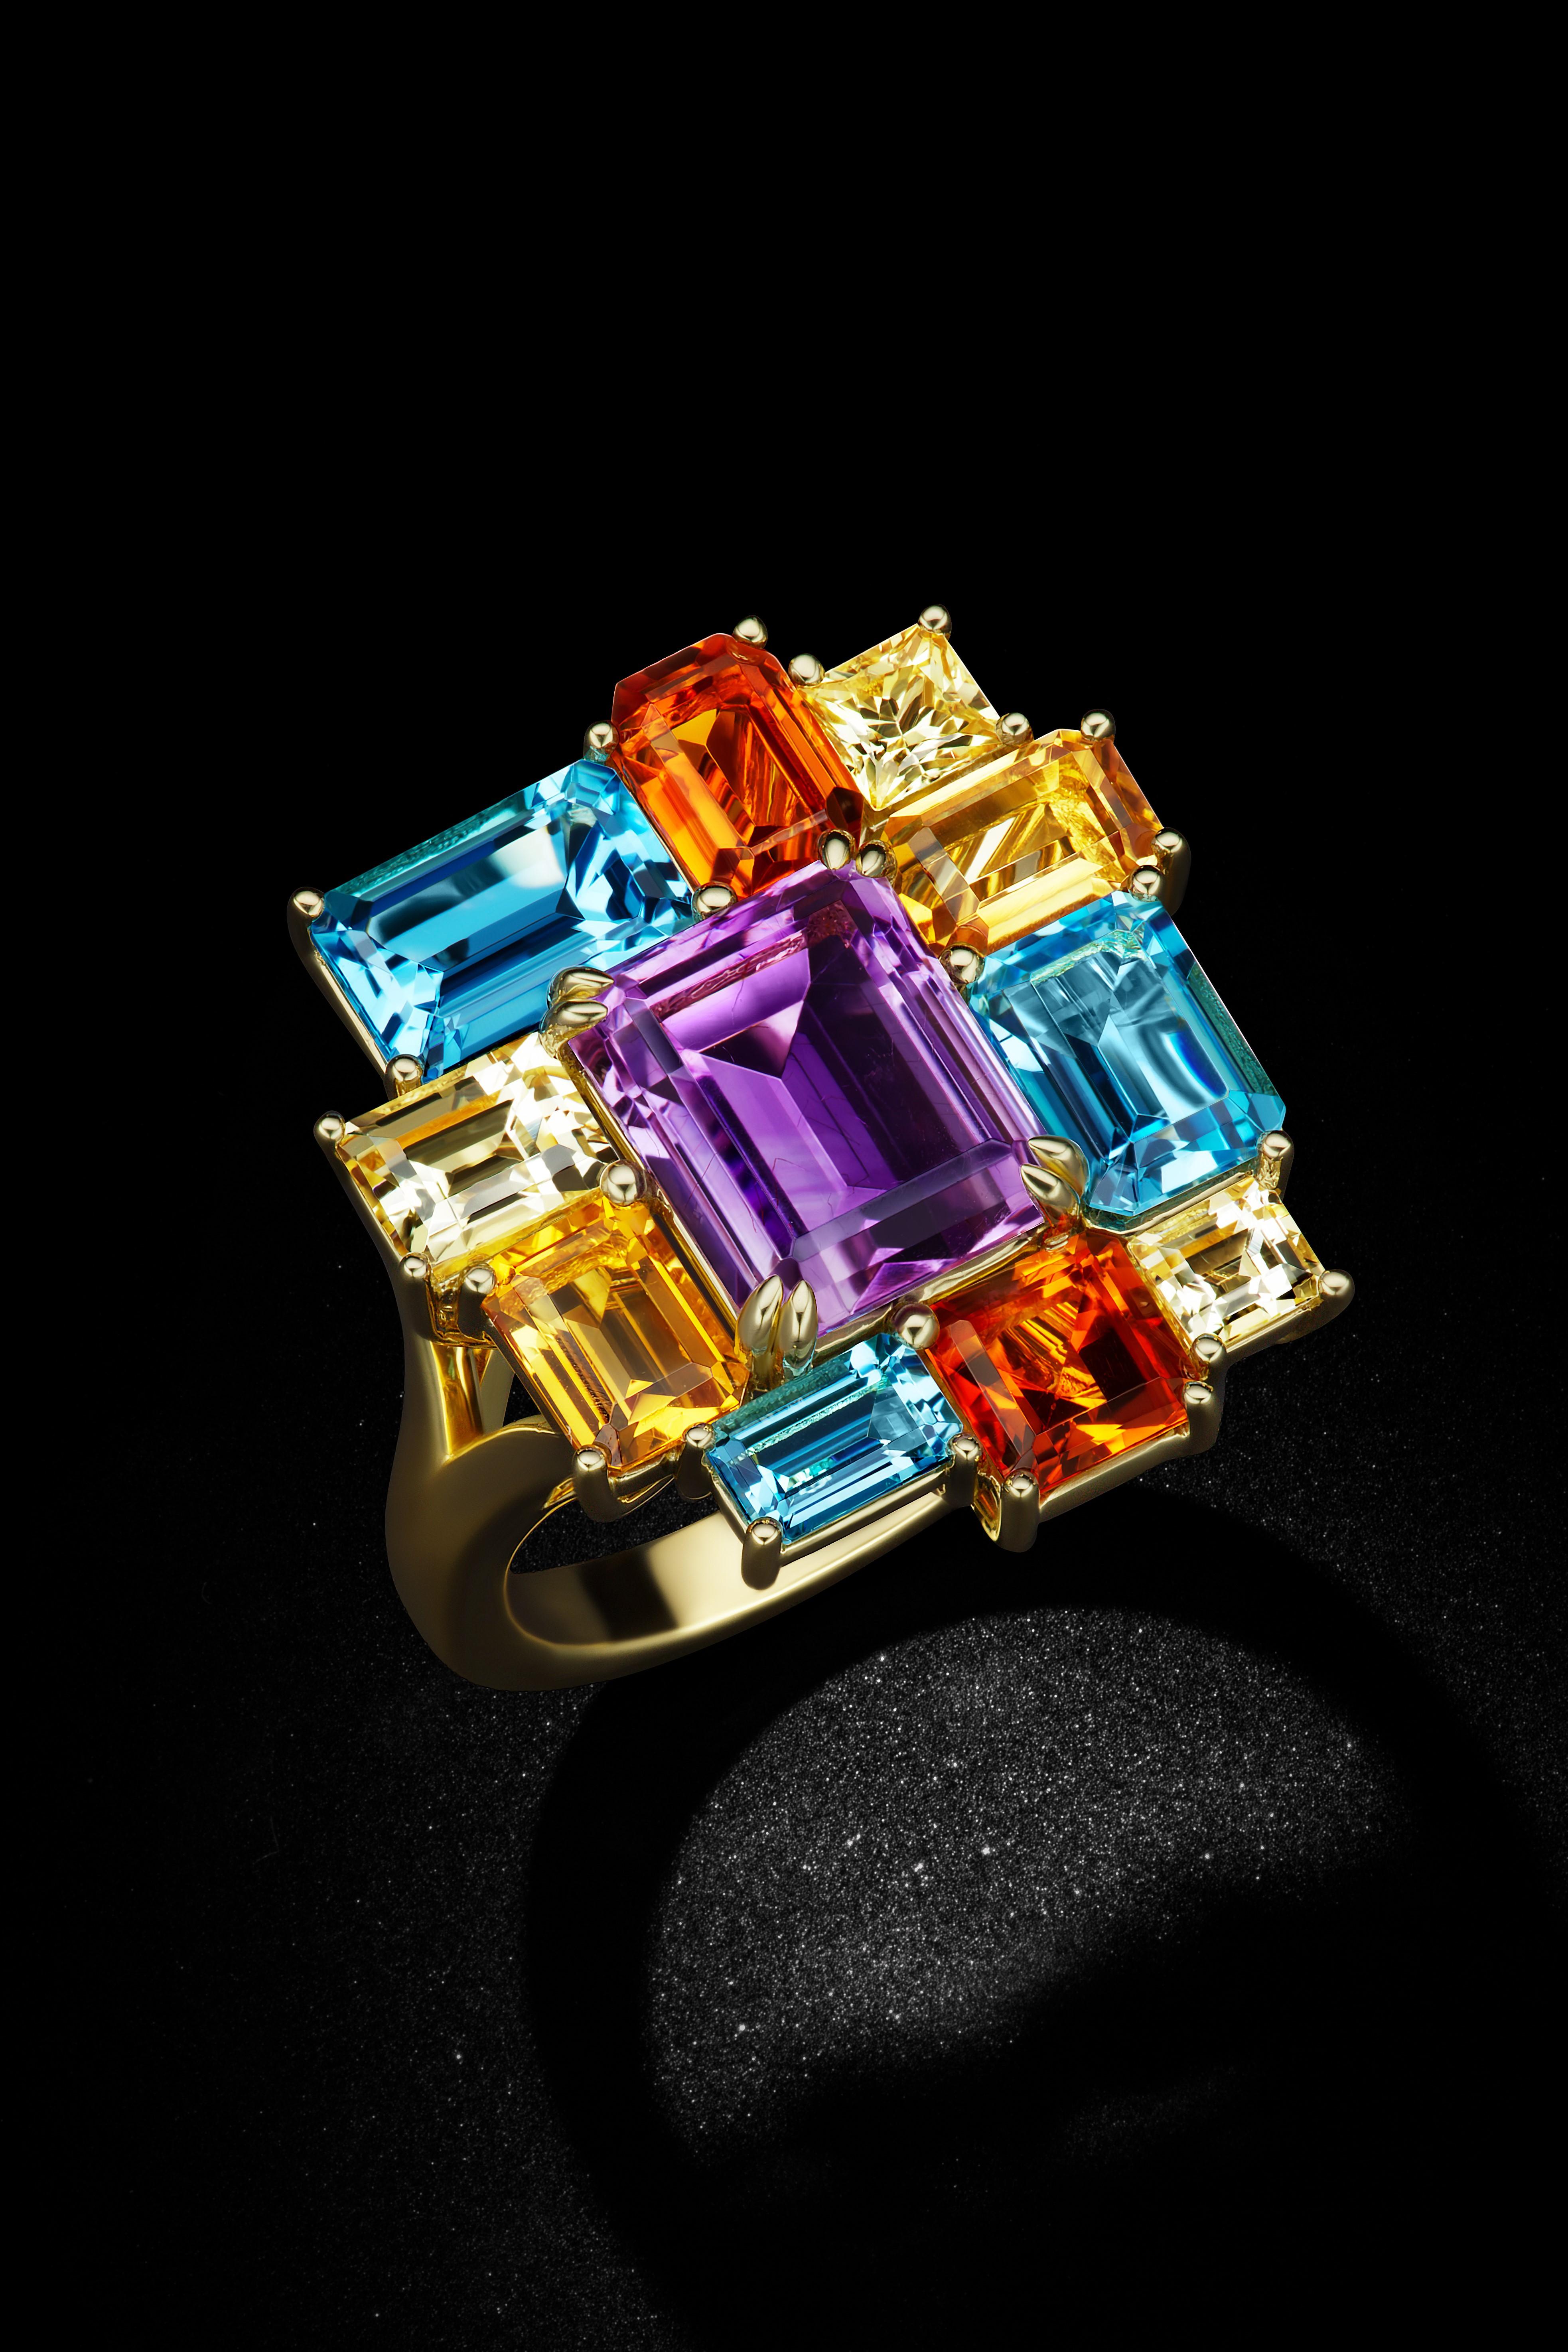 This 18K Yellow Gold Ring with its staggered shapes is reminiscent of the Colorama years. The array of colors and cuts are a mosaic of an  Amethyst, Blue topaz, Yellow Citrine , Golden Citrine and Yellow Sapphires at 9 carats total. 

